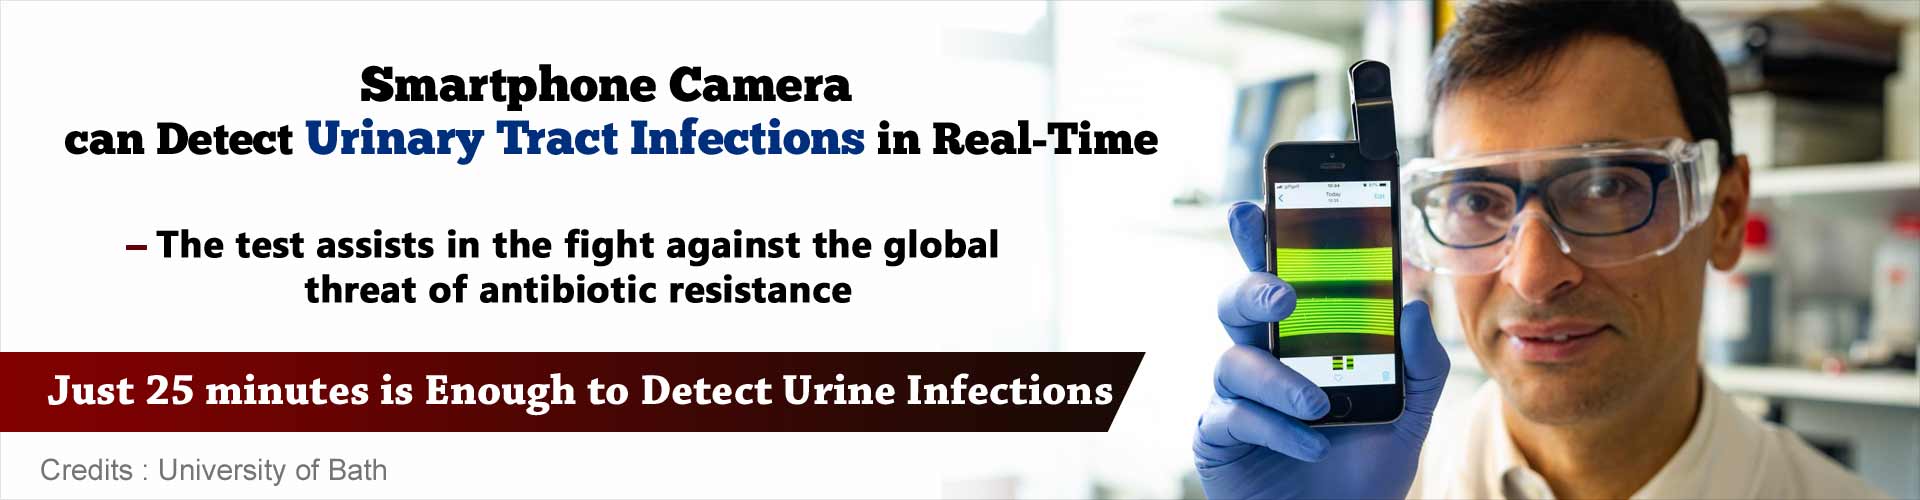 Smartphone camera can detect Urinary Tract Infections in real-time. The test assists in the fight against the global threat of antibiotic resistance. Just 25 minutes is enough to detect urine infections.